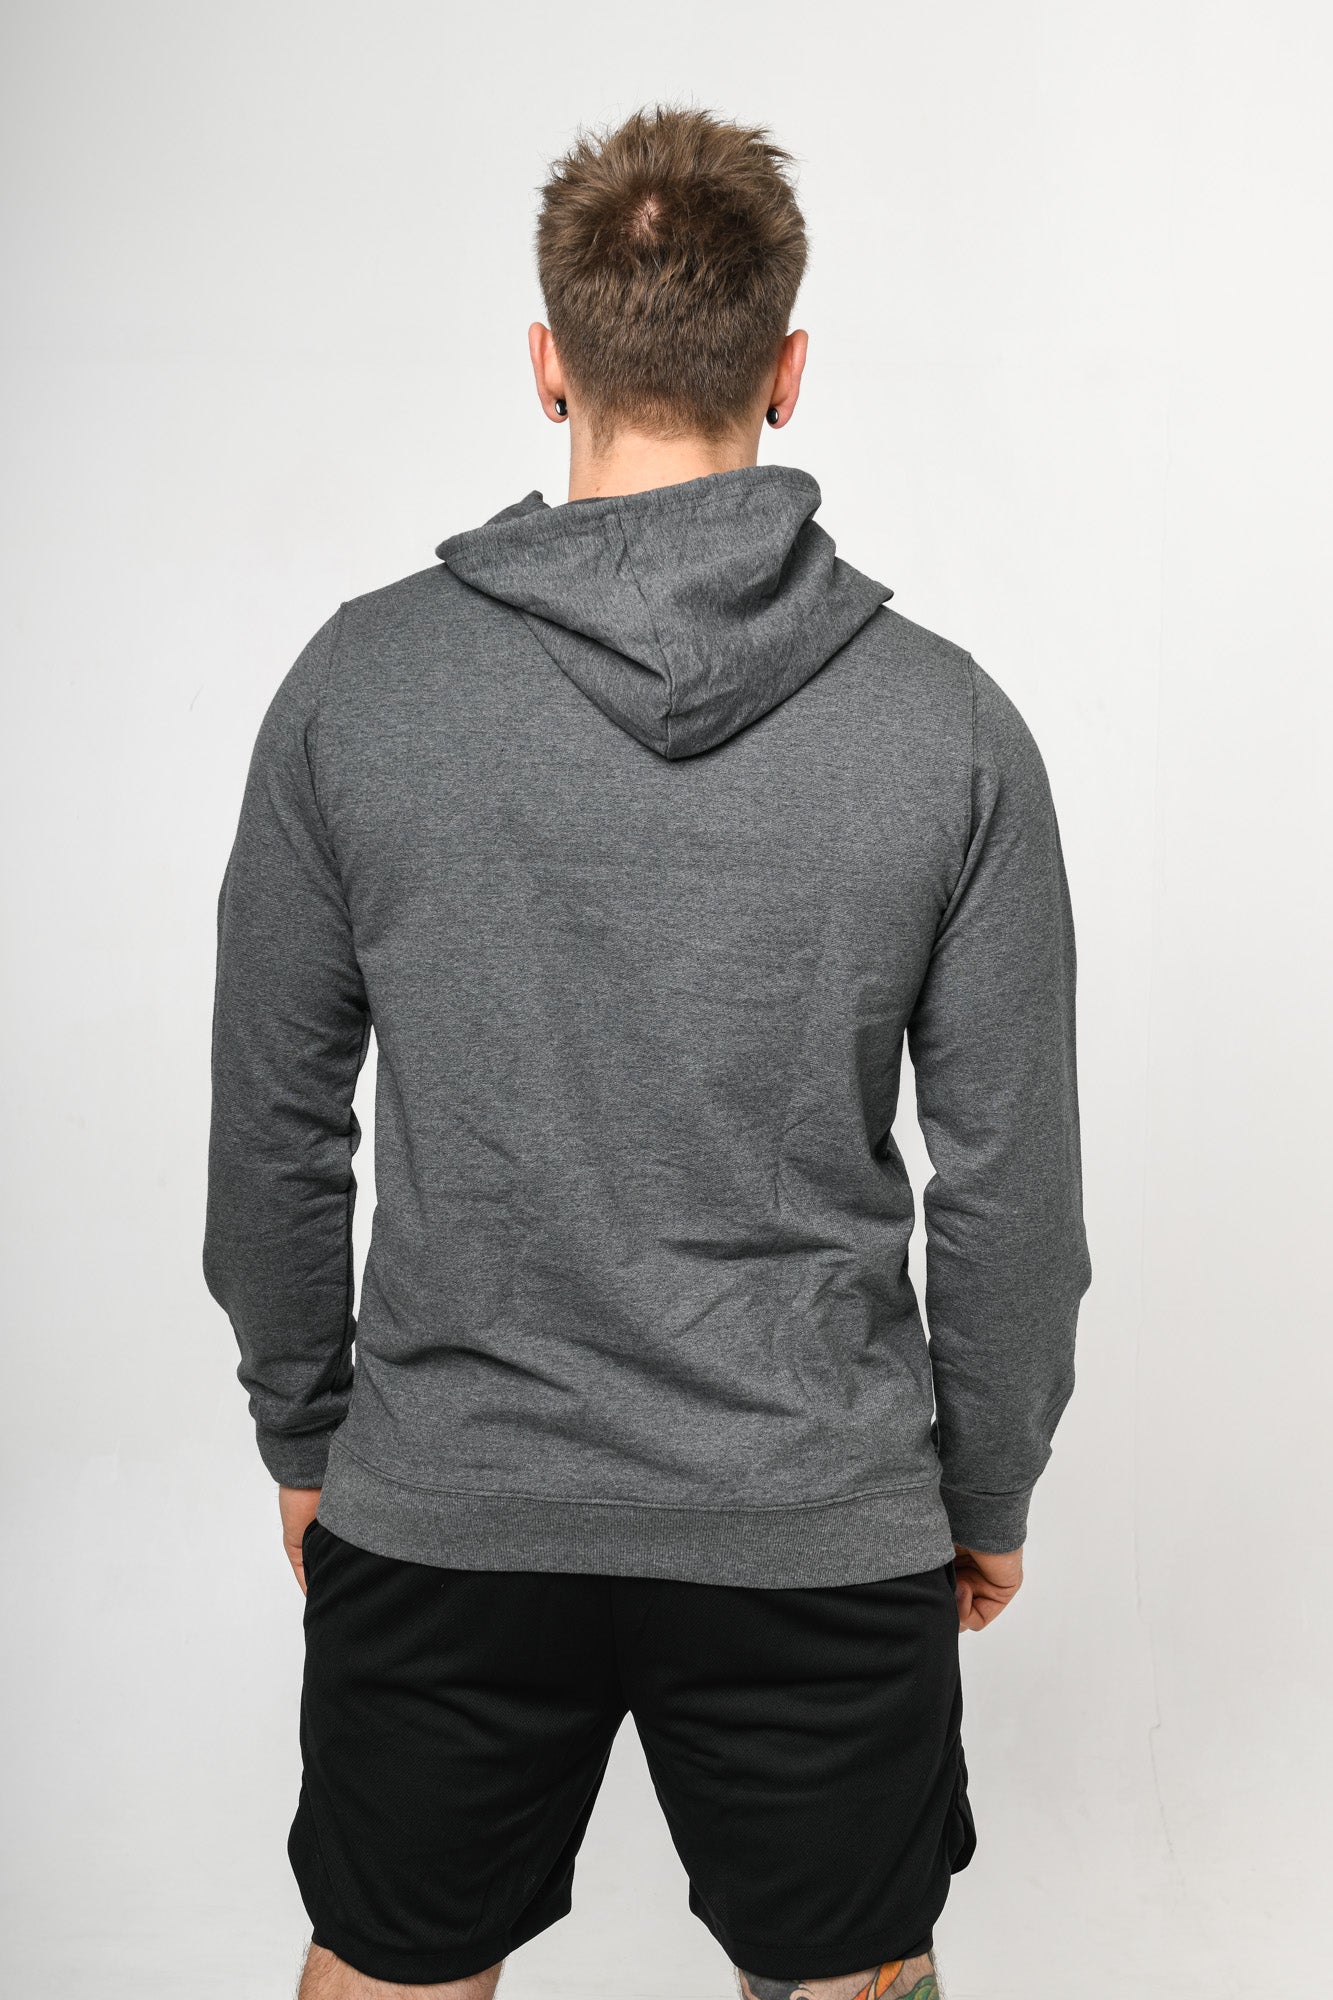 gym hoodie for men